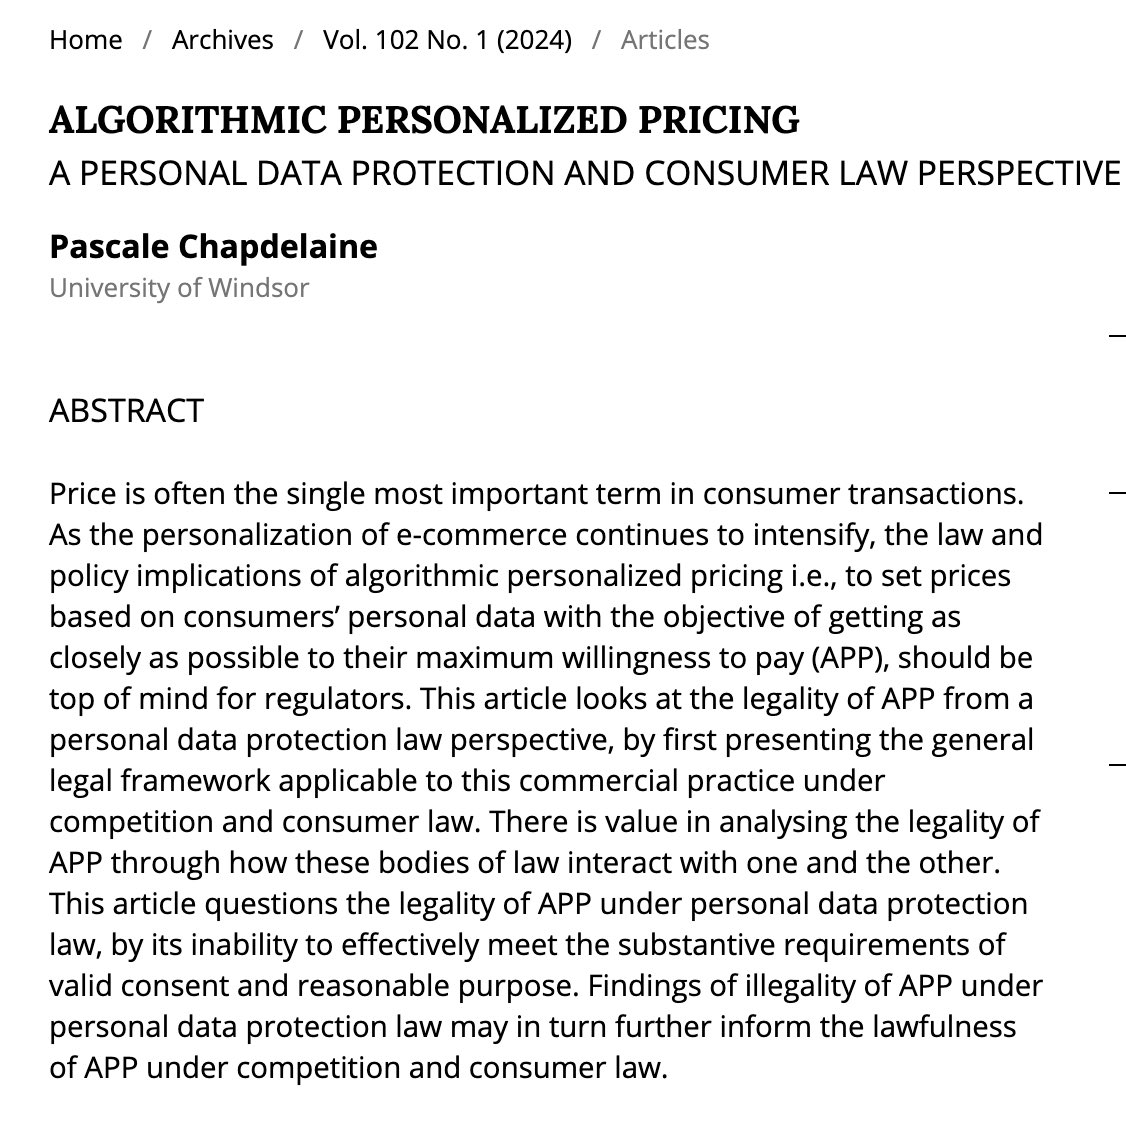 @PascaleChapdel1 on Algorithmic Personalized Pricing, #dataprotection and #consumerlaw protection in @CBA_News Review
cbr.cba.org/index.php/cbr/…